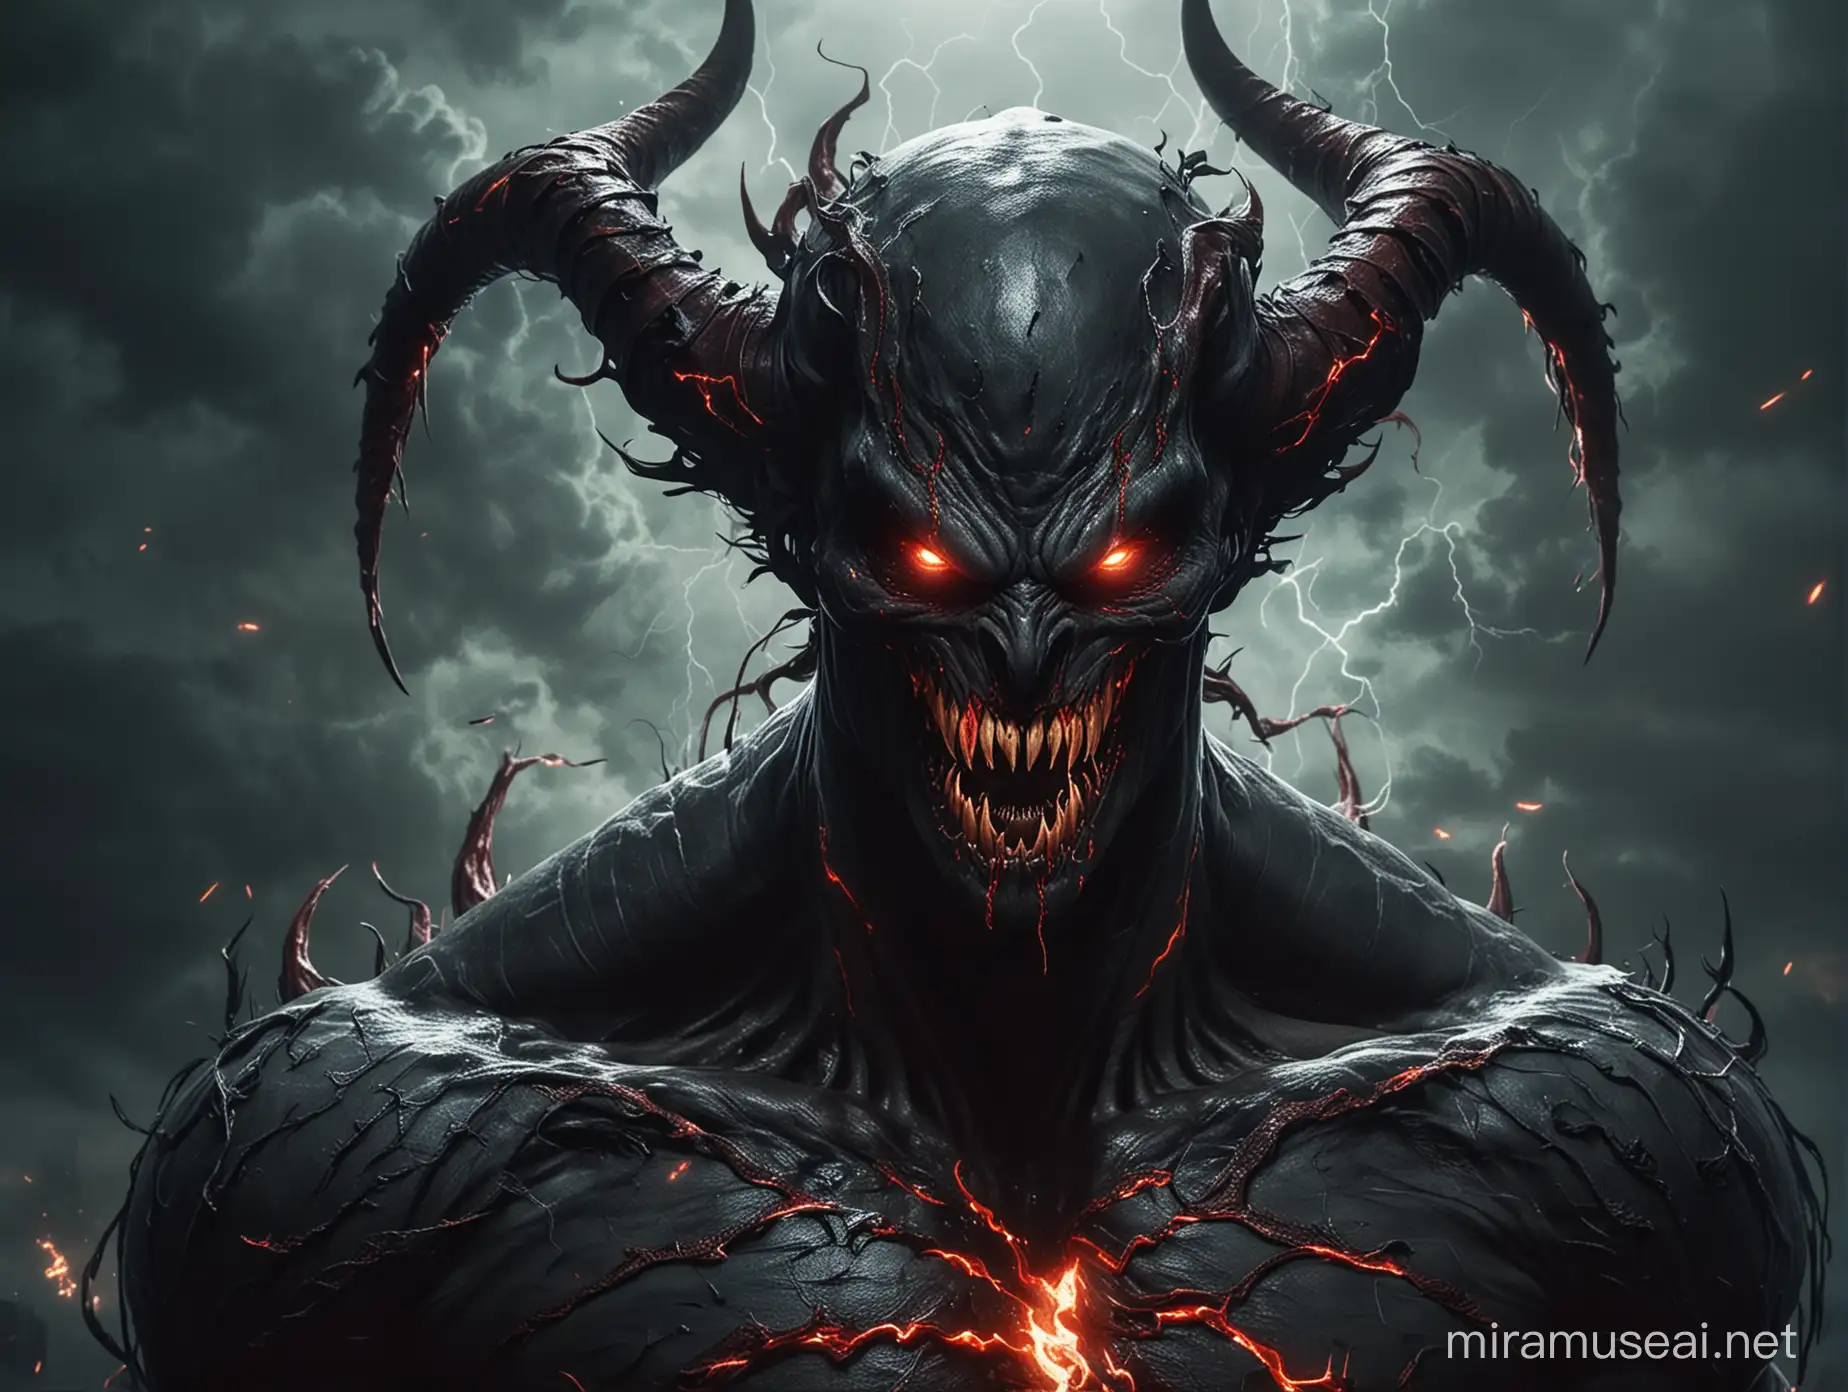 A supernatural evil being wants to destroy Earth. His face is like Venom with horns. he is atleast 9ft tall and skinny. There is dark red lightning around him. He loks extremely evil with glowing eyes.